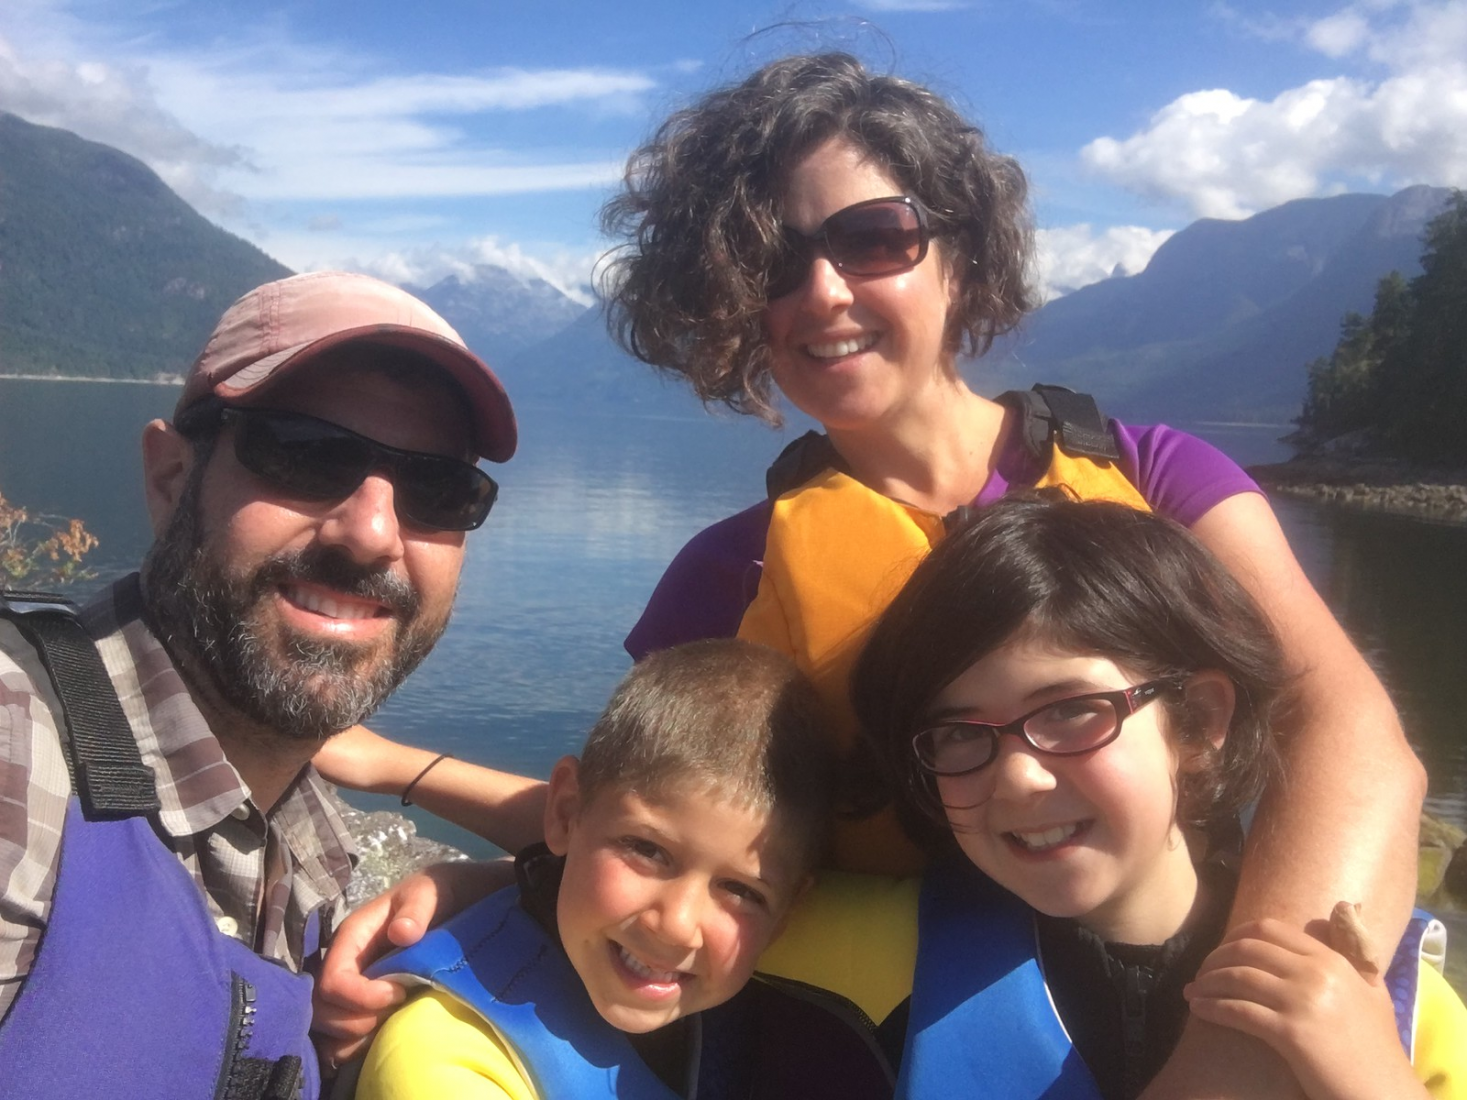 A man, a woman, and two kids all wearing life vests with a body of water and a mountain landscape in the background.